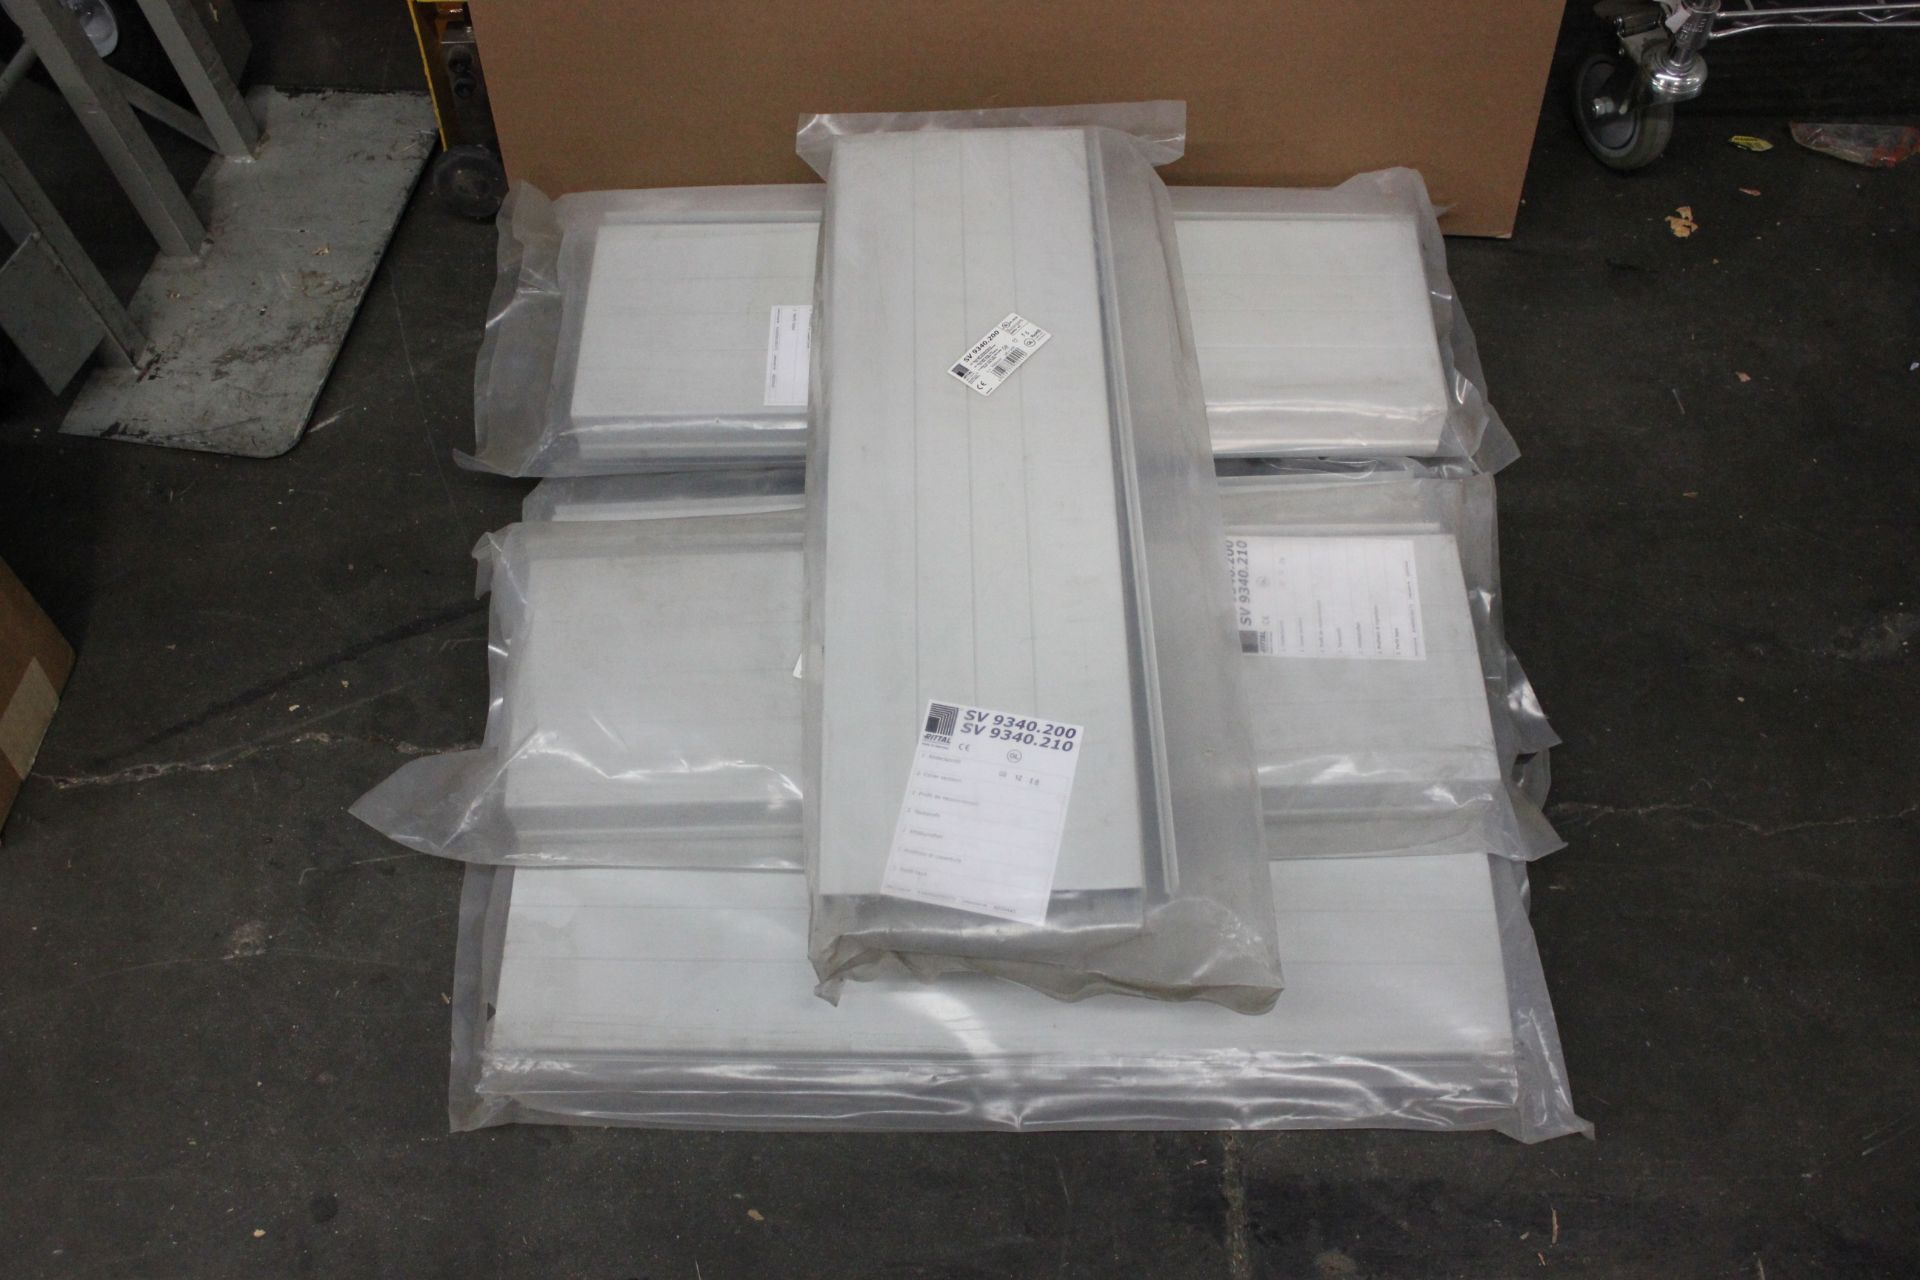 LOT OF 6 NEW RITTAL COVER SECTIONS FOR RILINE BUSBAR SYSTEMS